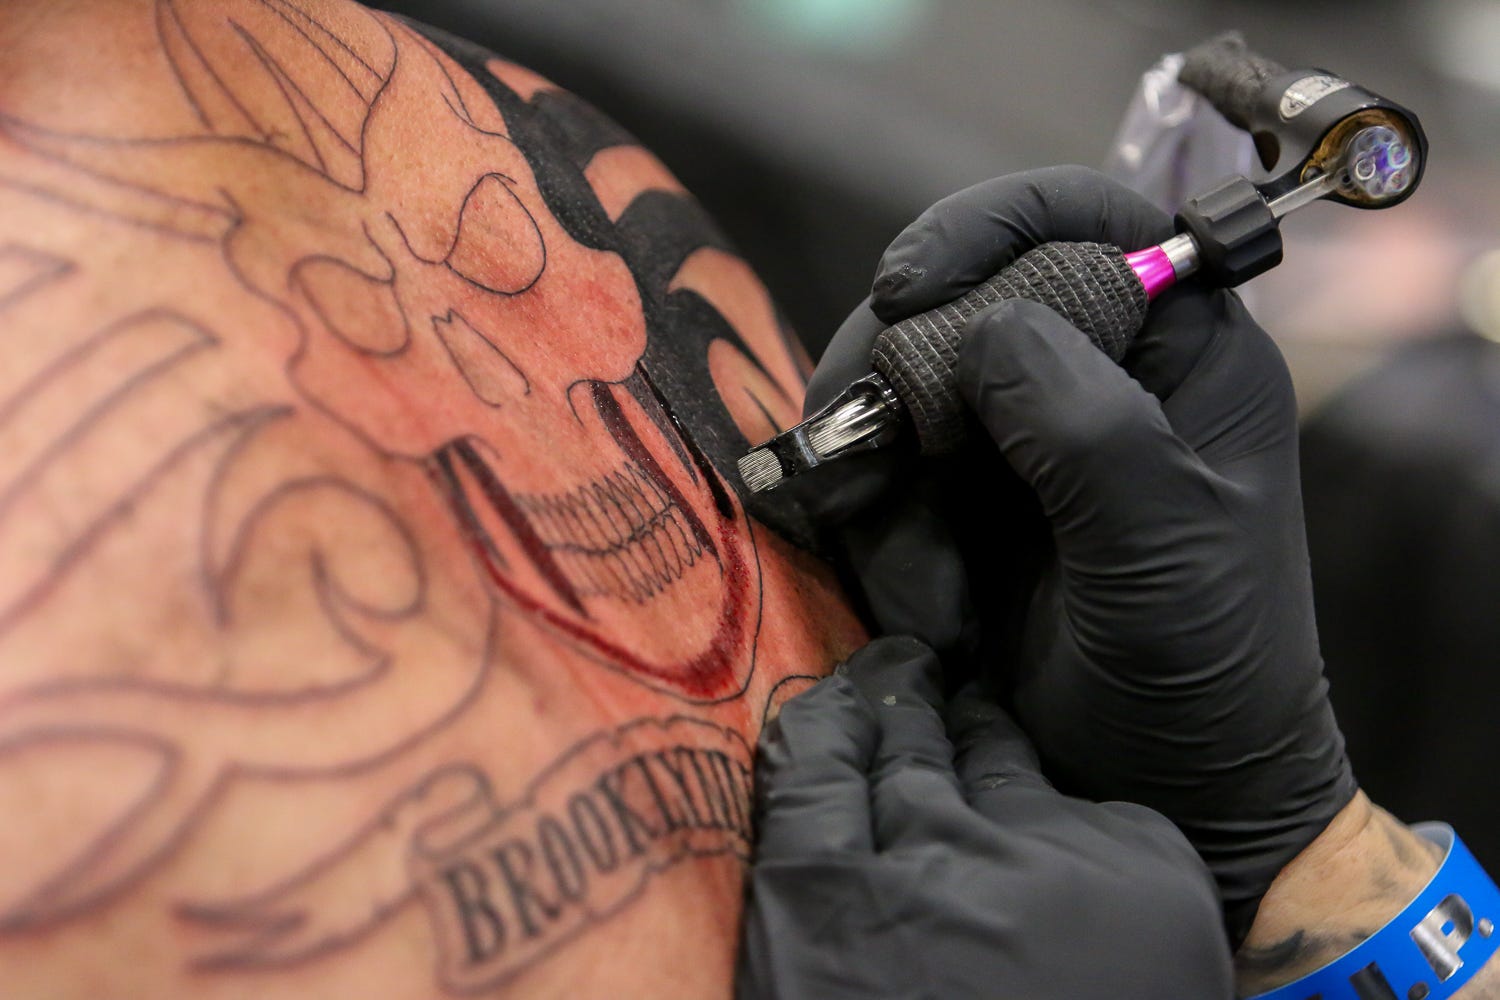 12 Top Tattoo shops in Pensacola Make Tattoo Experience Incredible